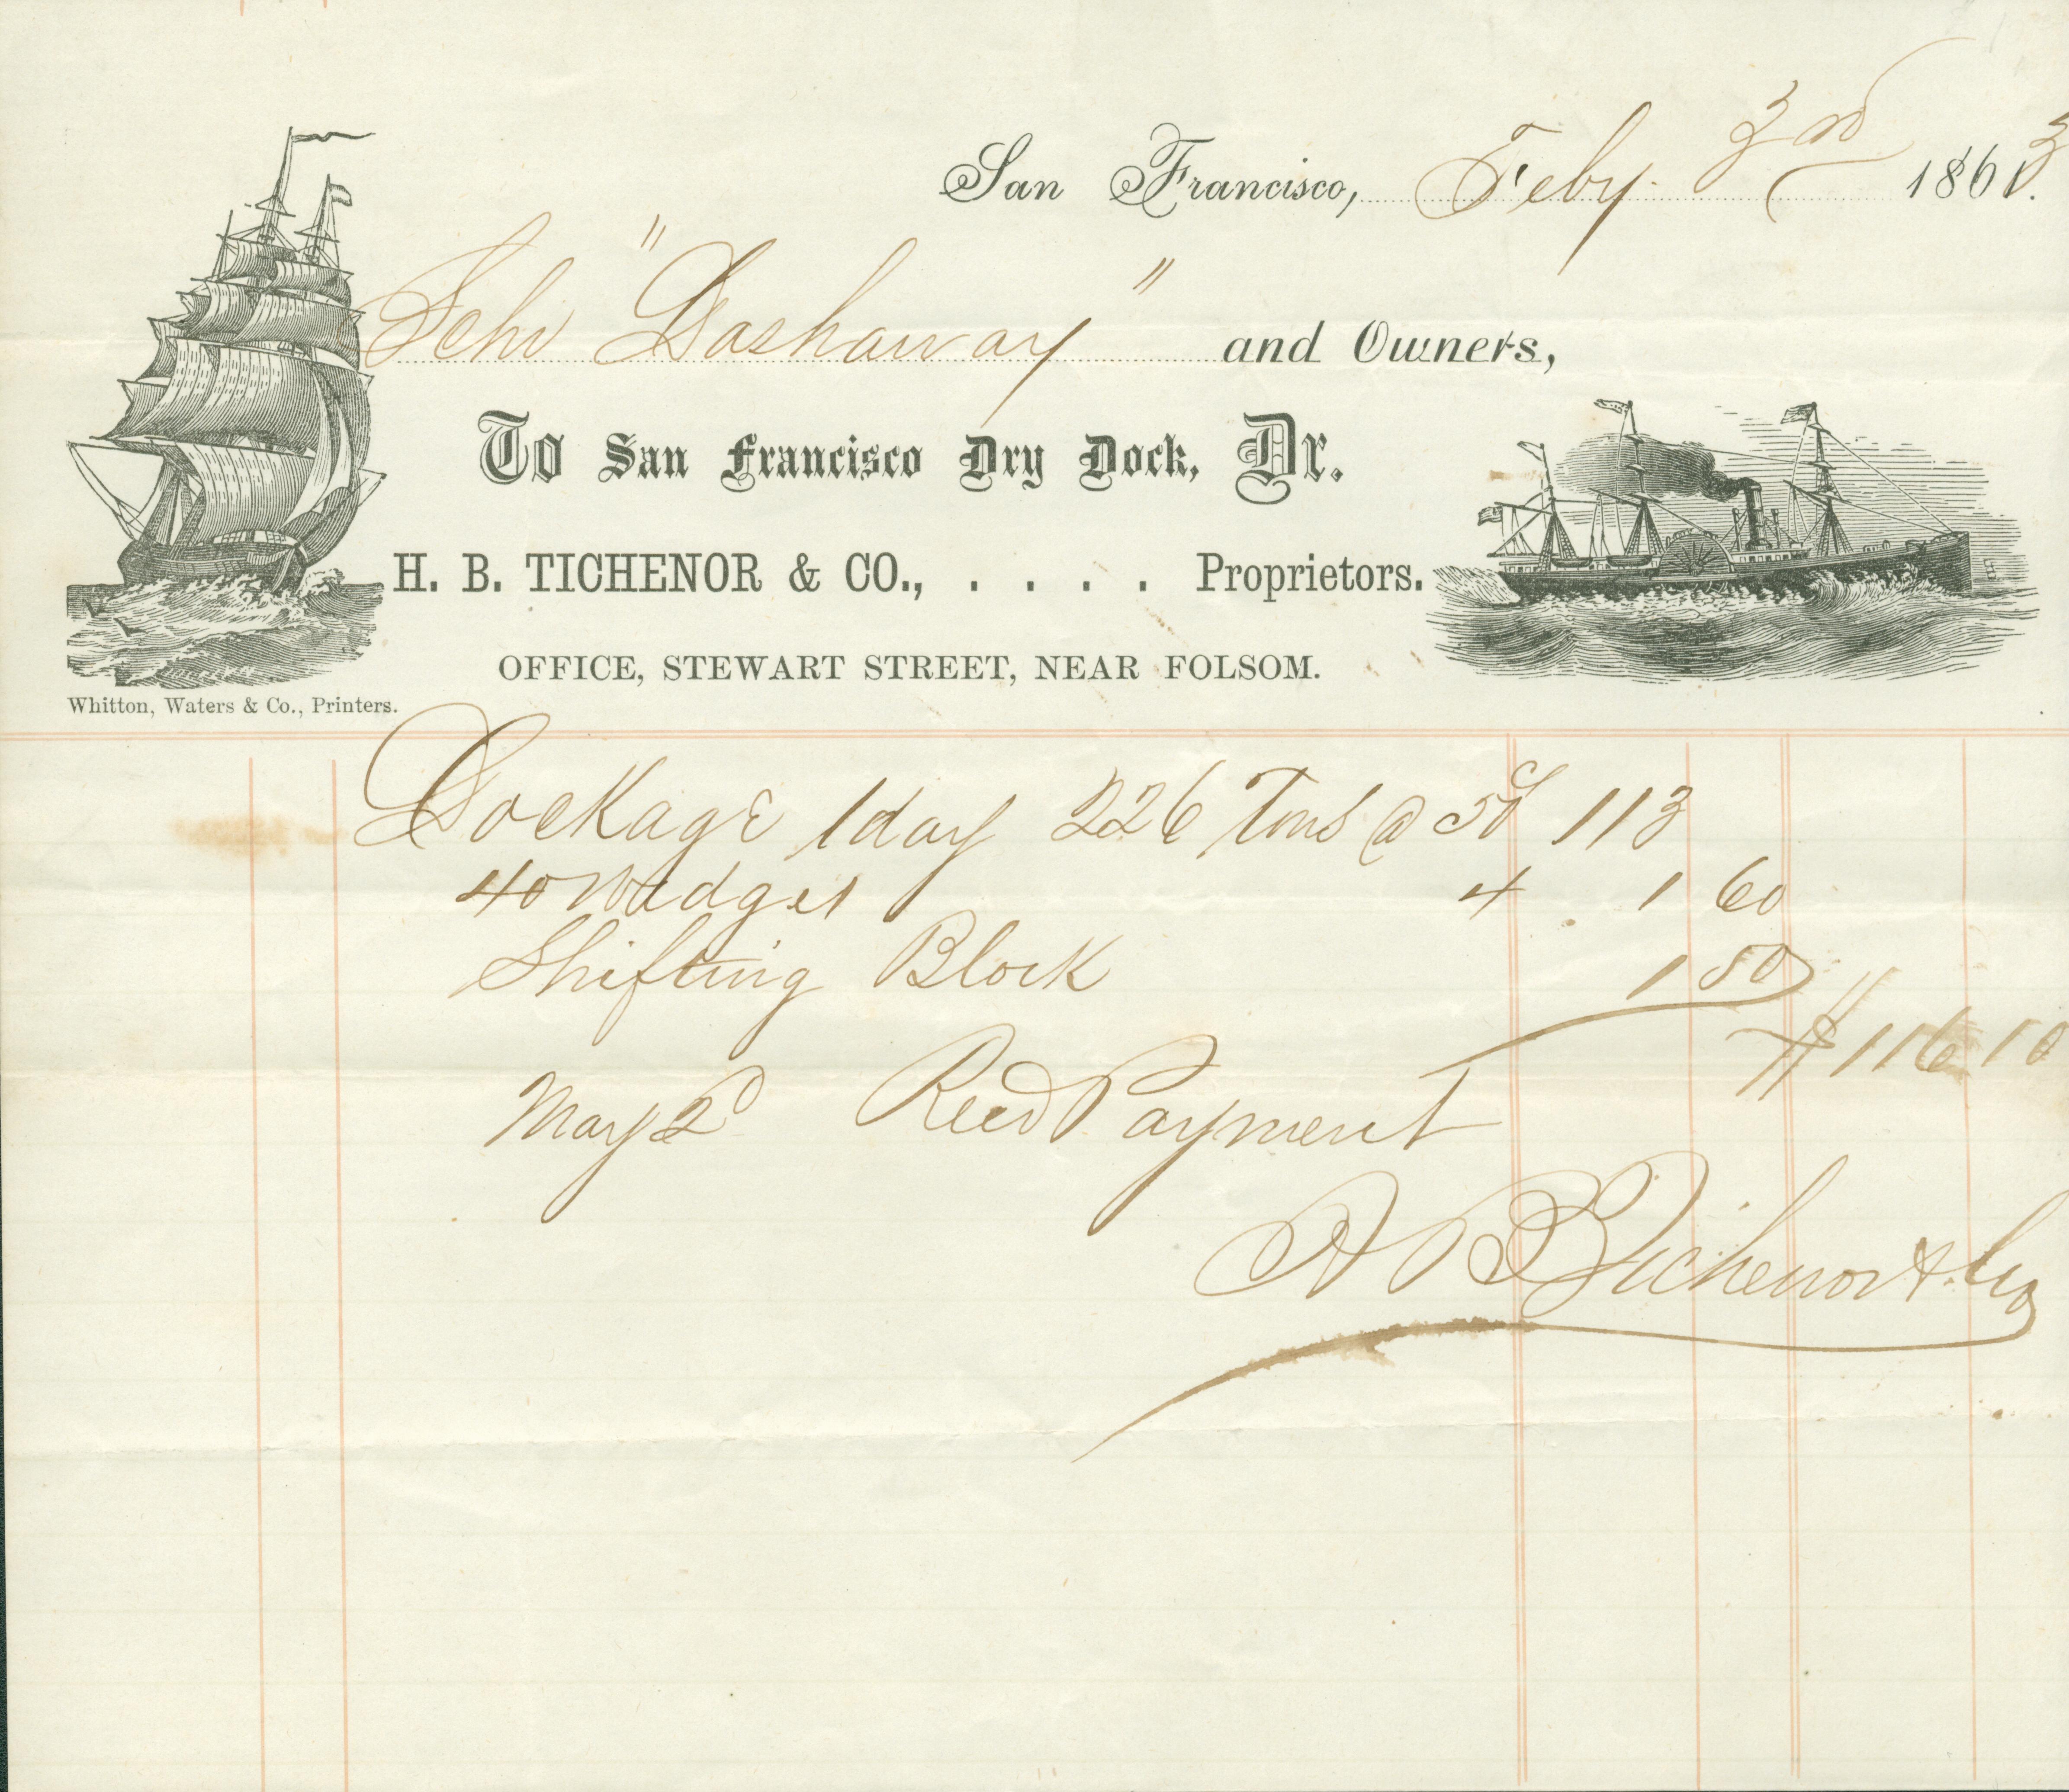 Receipt header information framed by two ships